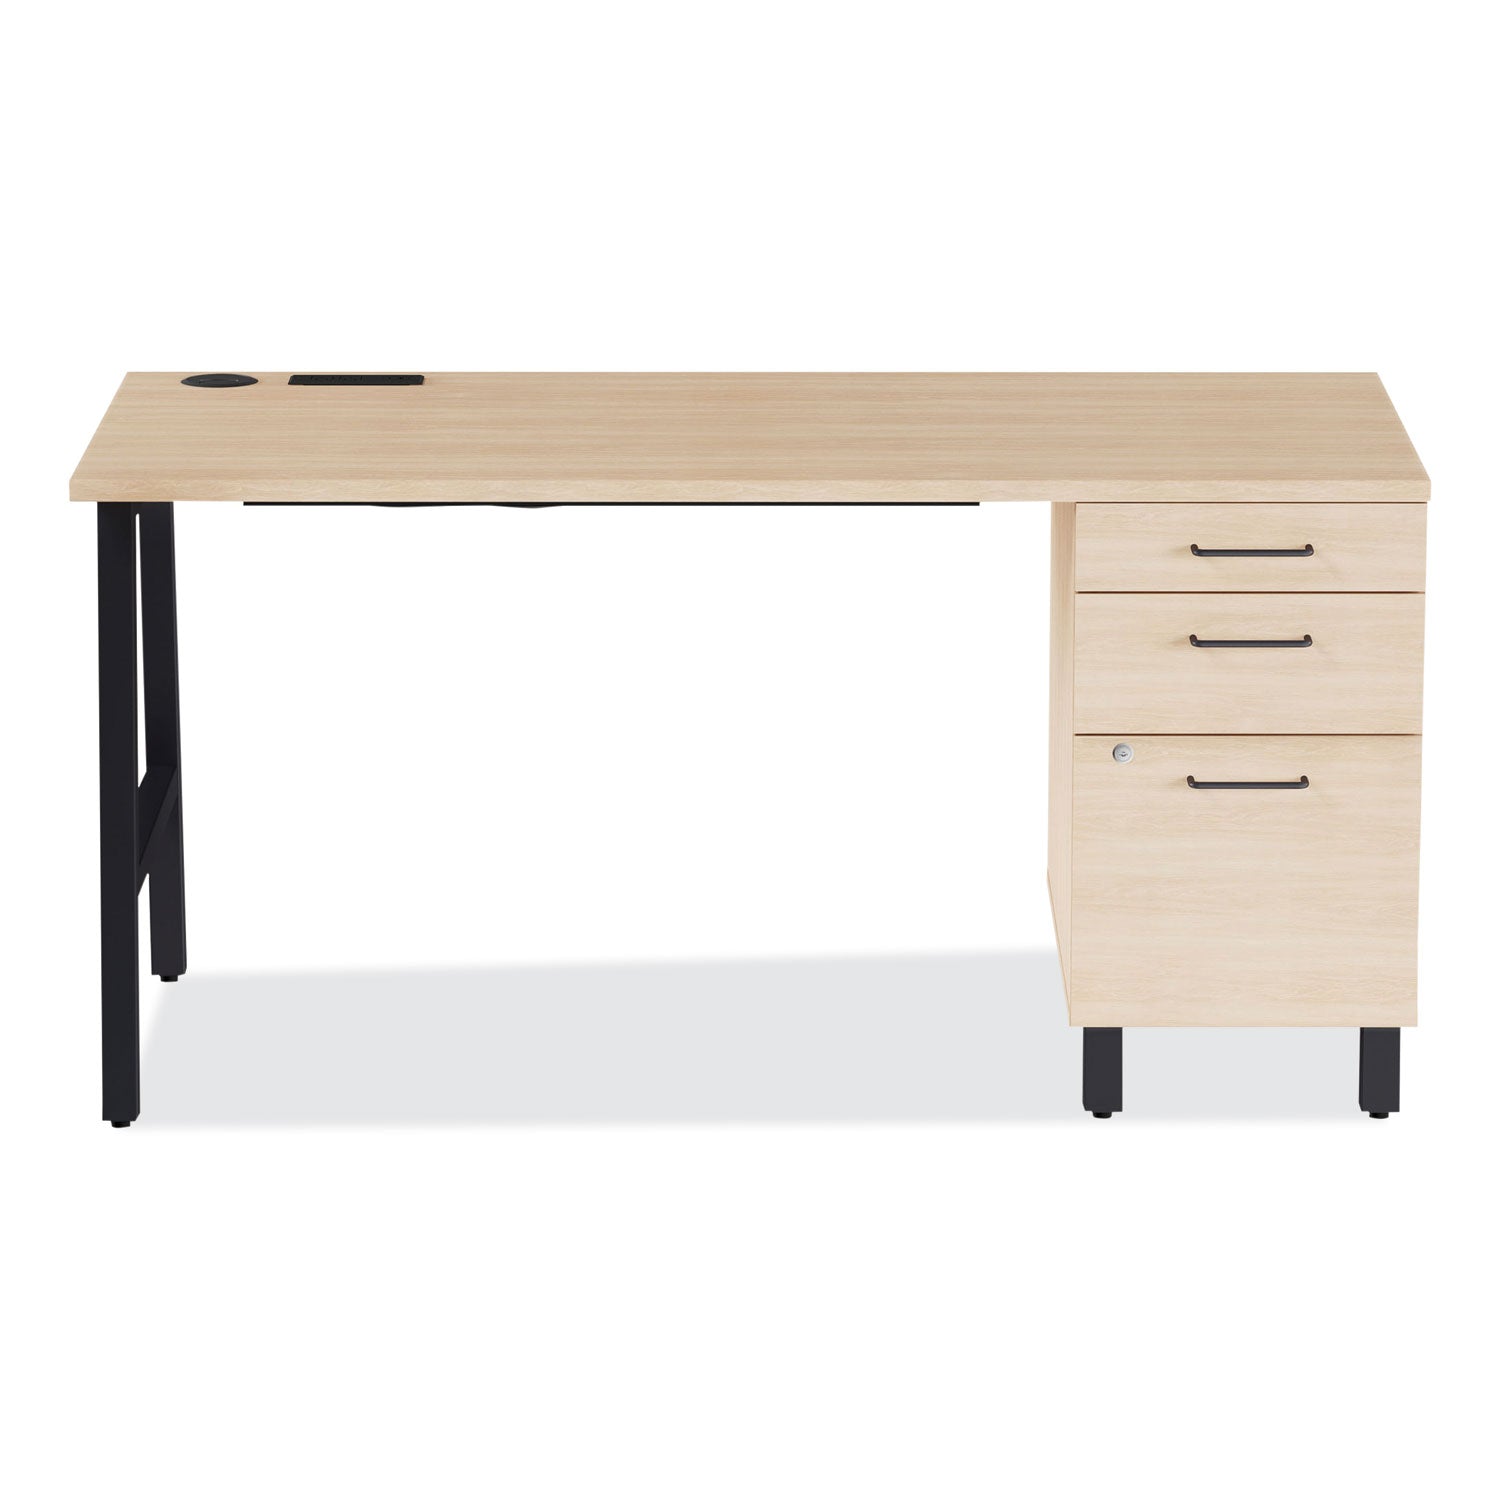 essentials-single-pedestal-writing-desk-with-integrated-power-management-598-x-299-x-297-natural-wood-black_uos60419cc - 1